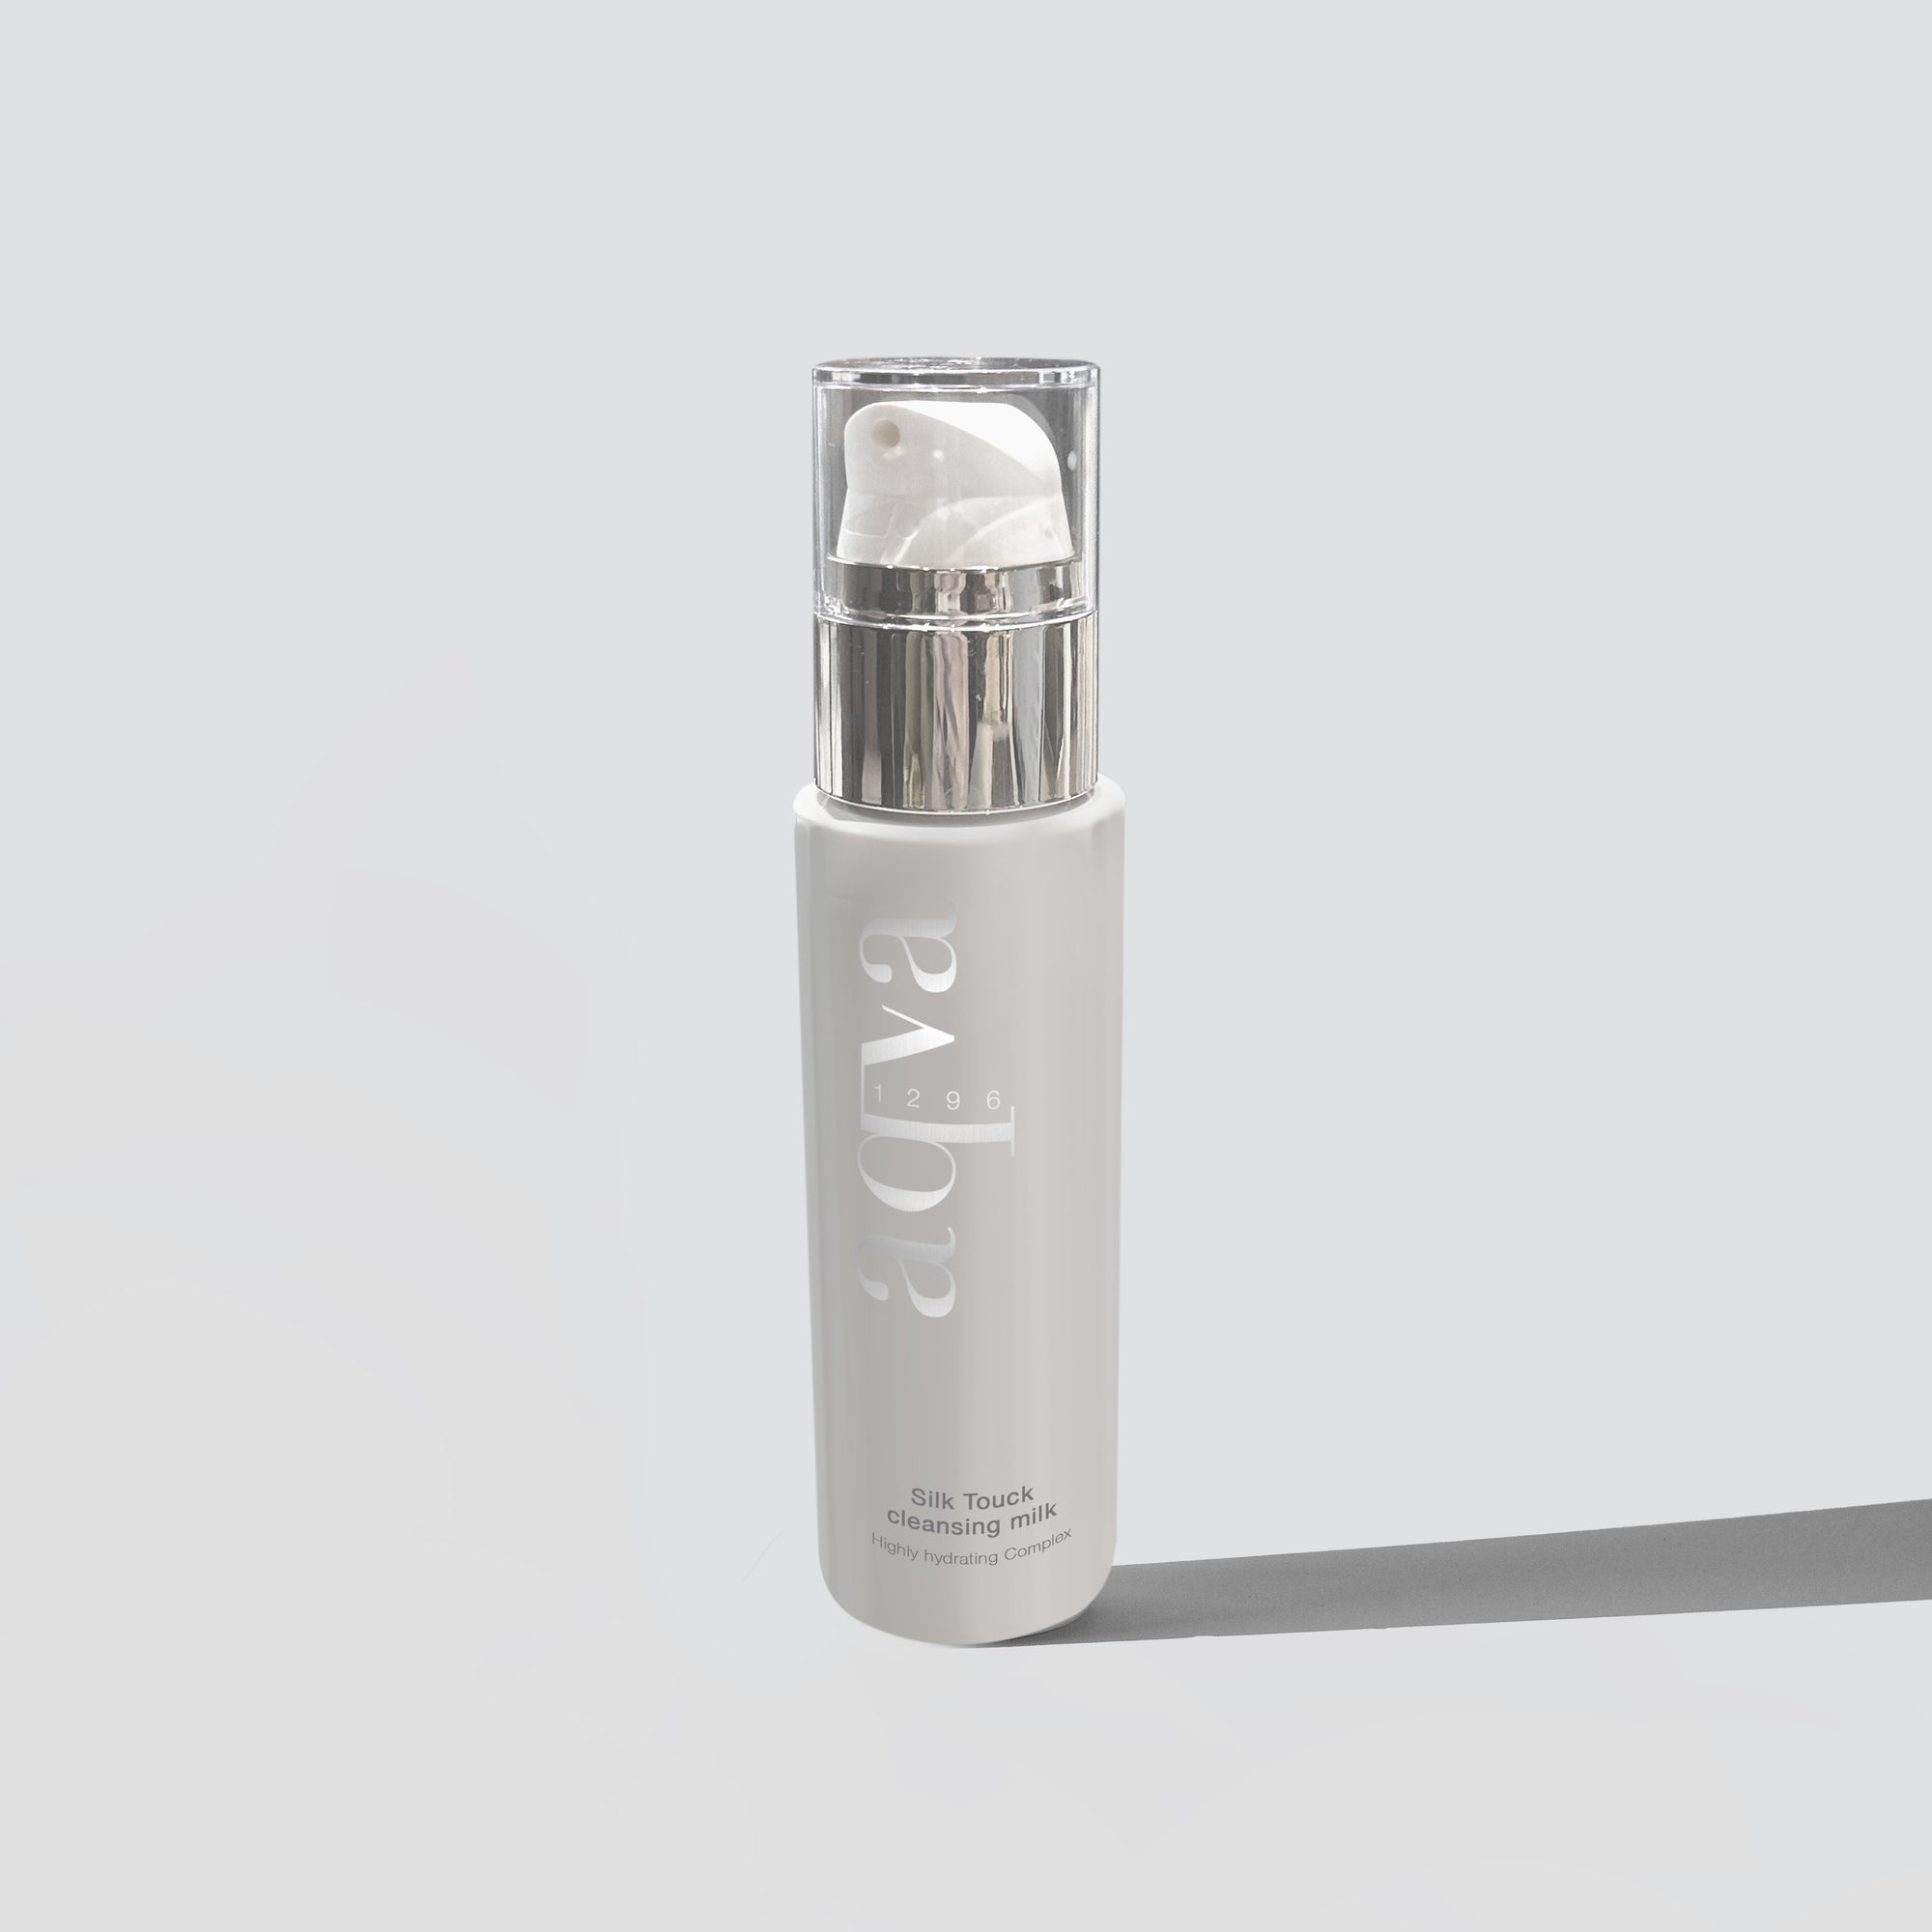 Aqva1296 - Silk touch Cleansing Milk - LaVit Collection